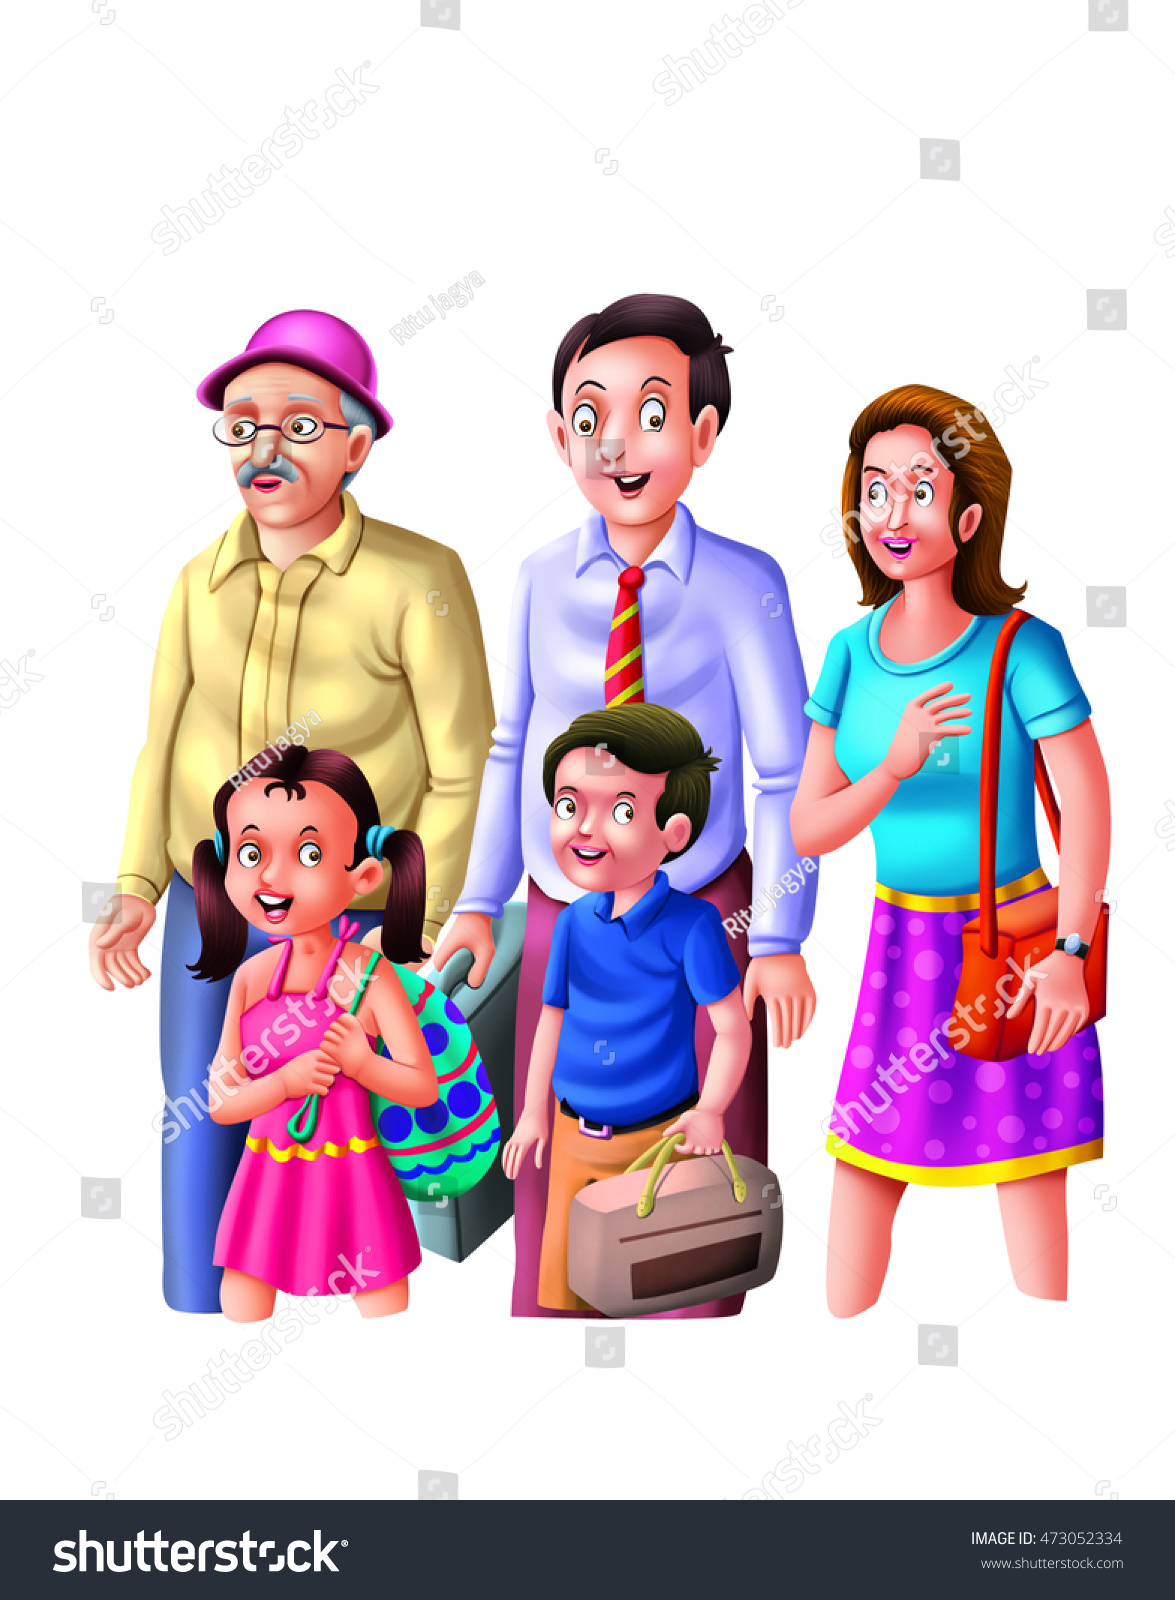 joint family clipart images - photo #47